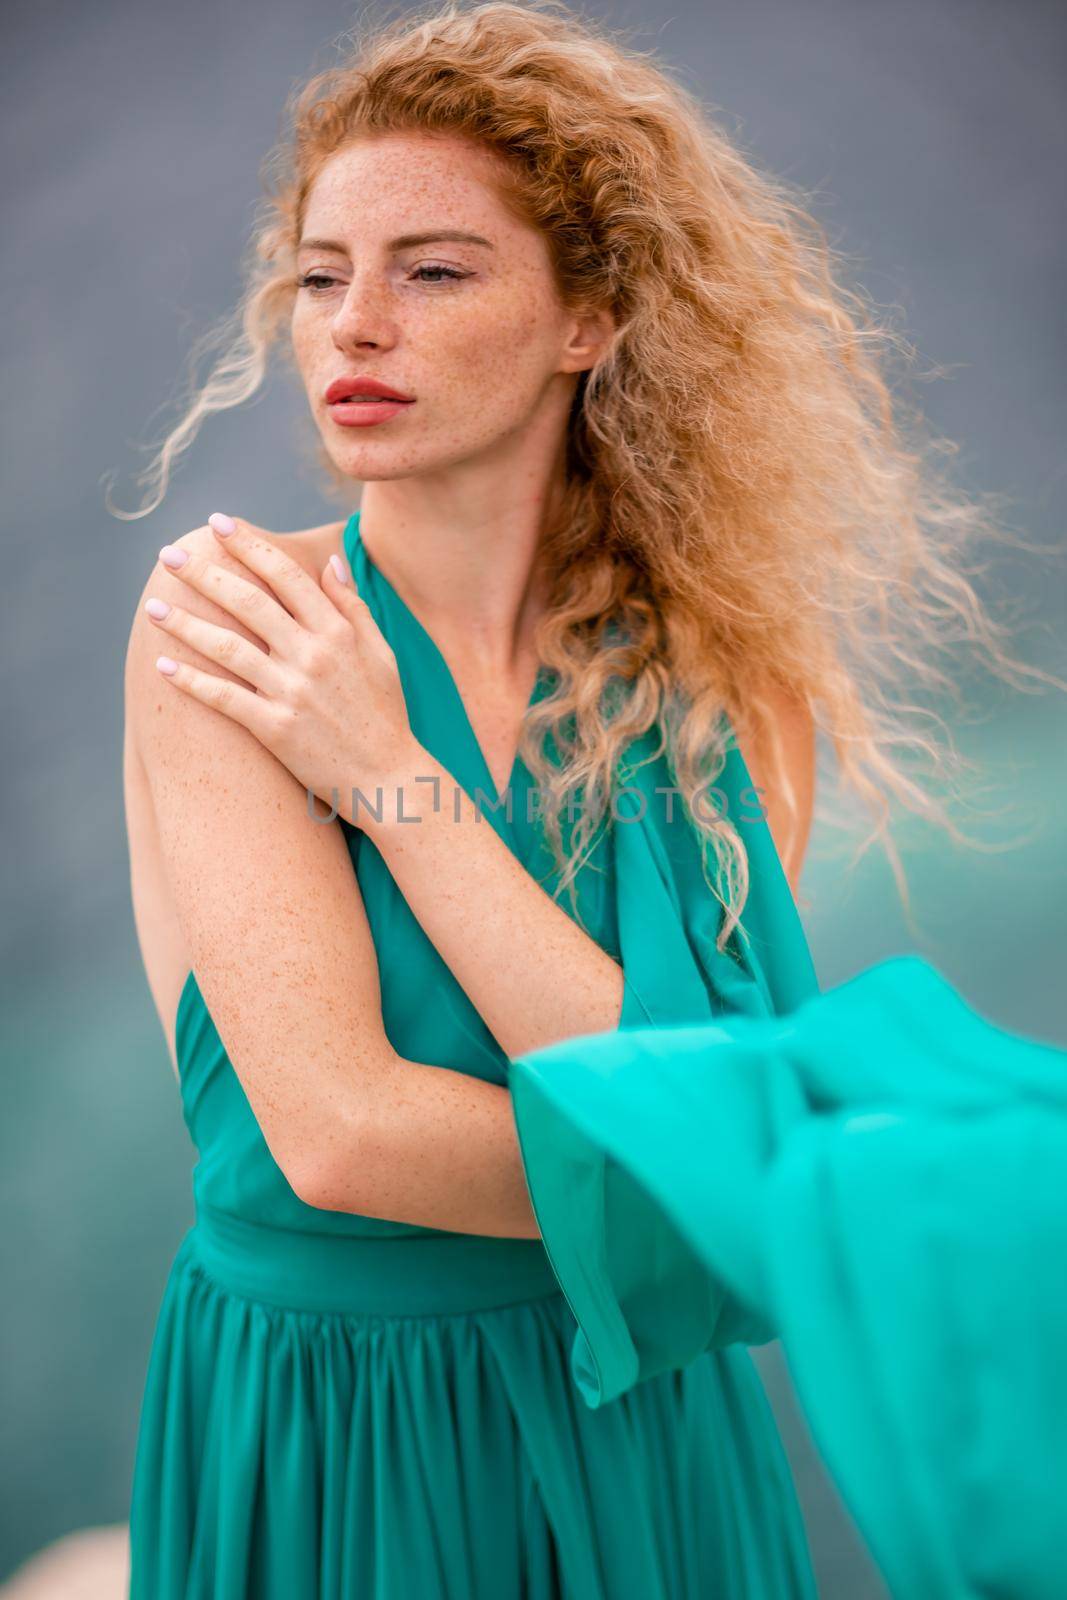 Outdoor portrait of a young beautiful natural redhead girl with freckles, long curly hair, in an emerald dress, posing against the background of the sea. by Matiunina